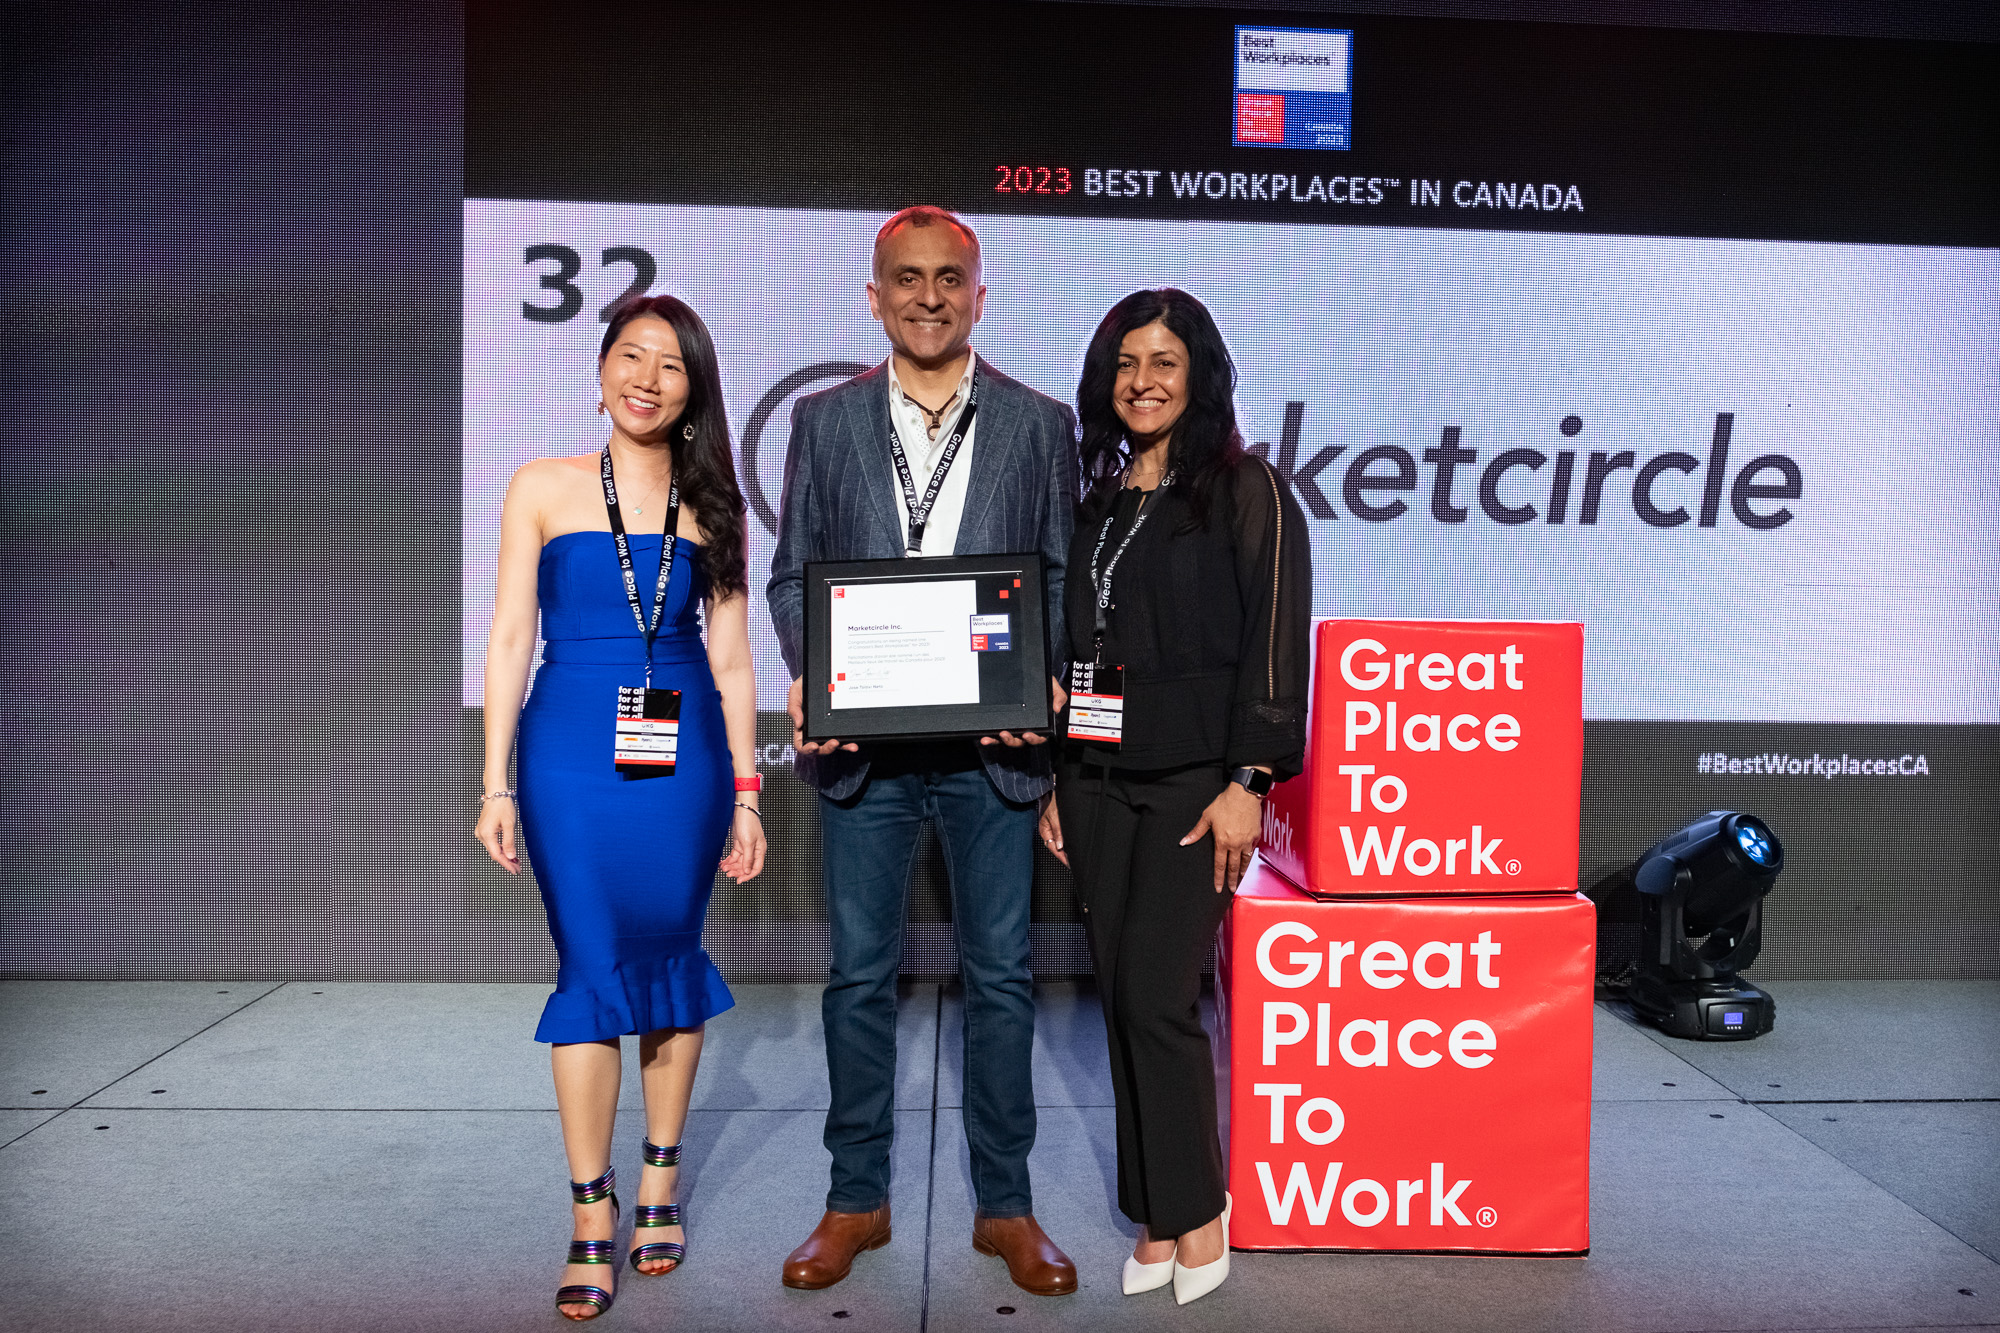 Three people pose in front of a screen during the Best Workplaces in Canada ceremony. They wear formal attire and smile side-by-side. Alykhan Jetha, CEO of Marketcircle, stands in the middle holding Best Workplaces in Canada award.